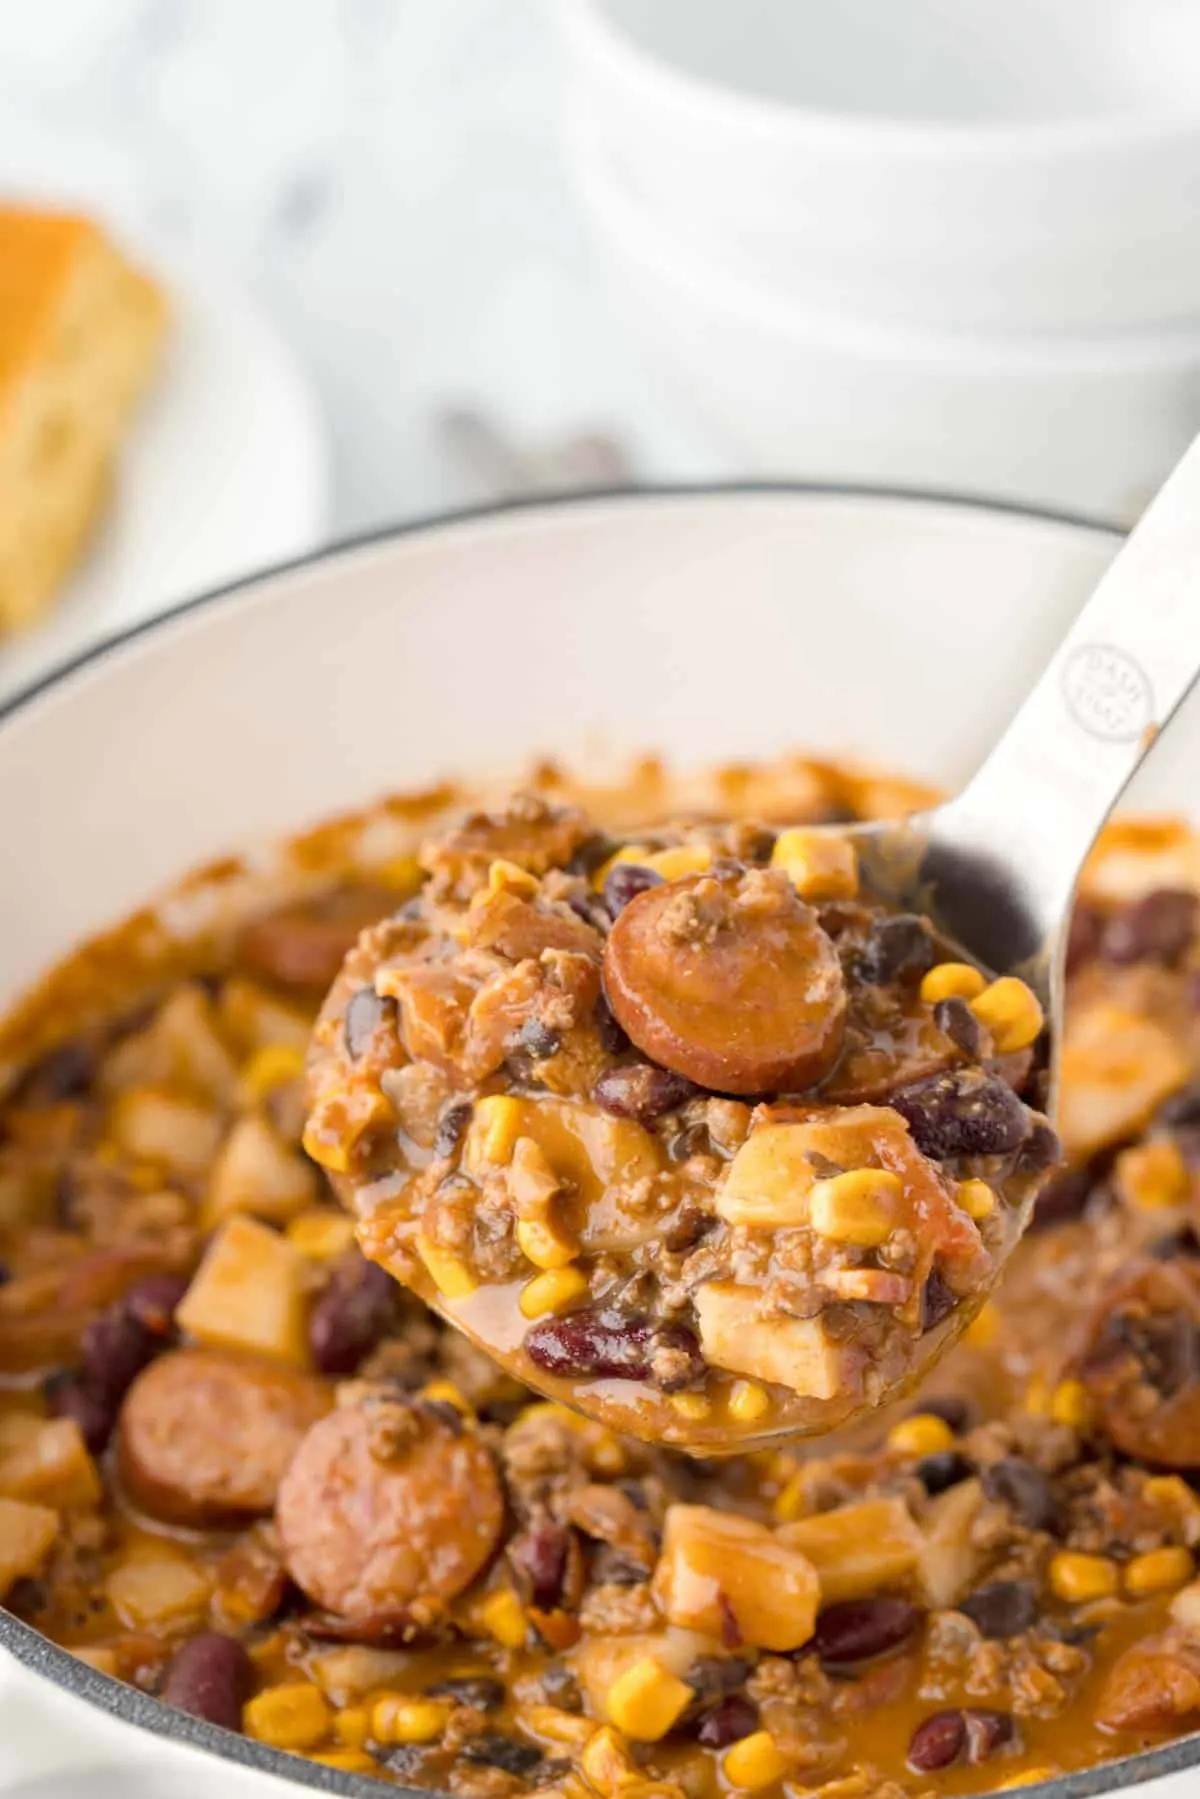 Texas Cowboy Stew is a hearty dish loaded with ground beef, smoked sausage, bacon, potatoes, corn, beans and diced tomatoes all in a flavourful beef broth.